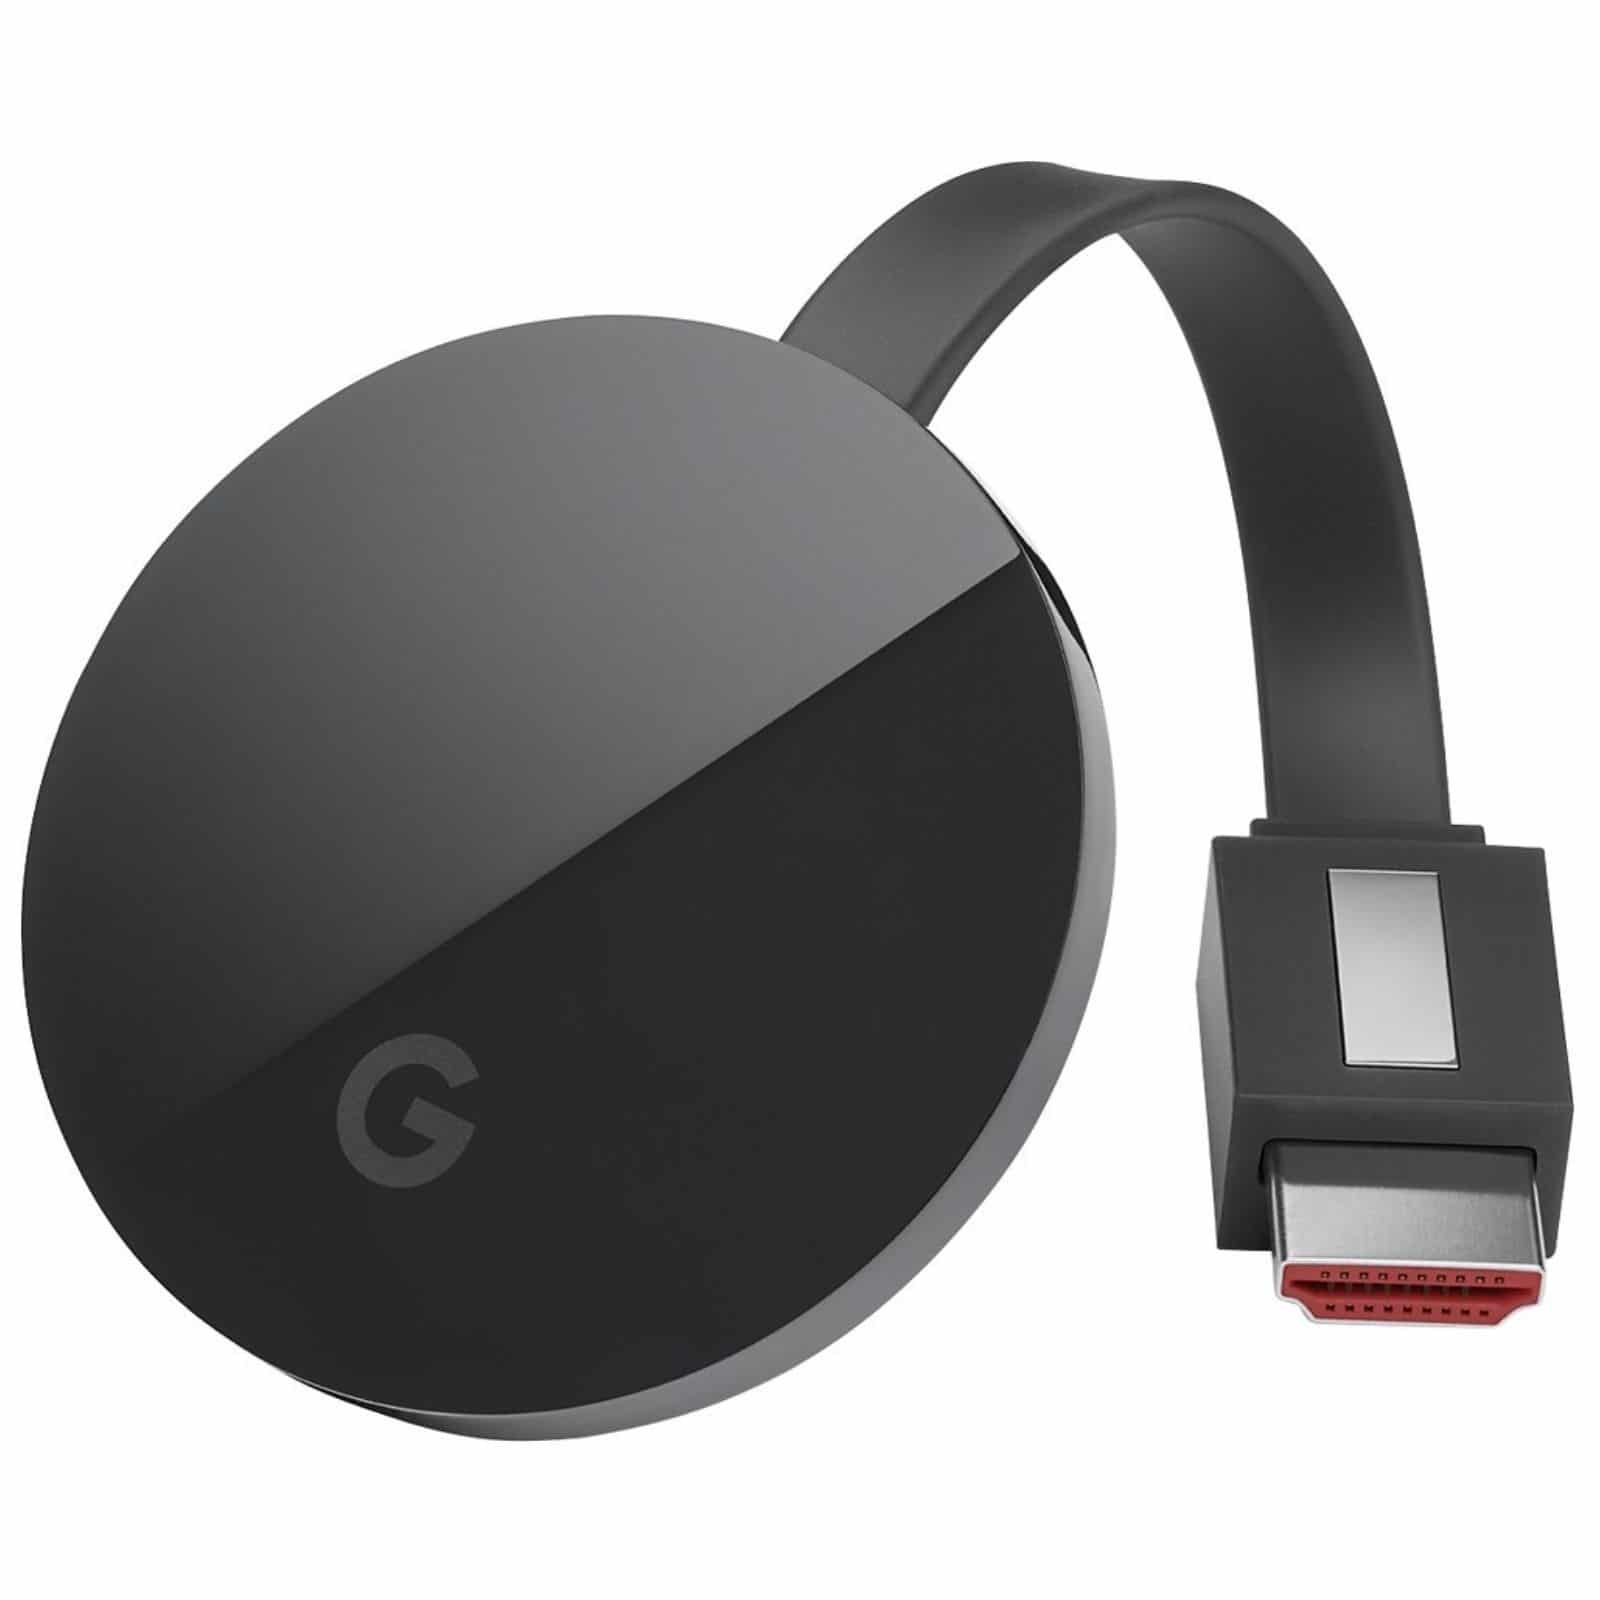 cast to chromecast from android